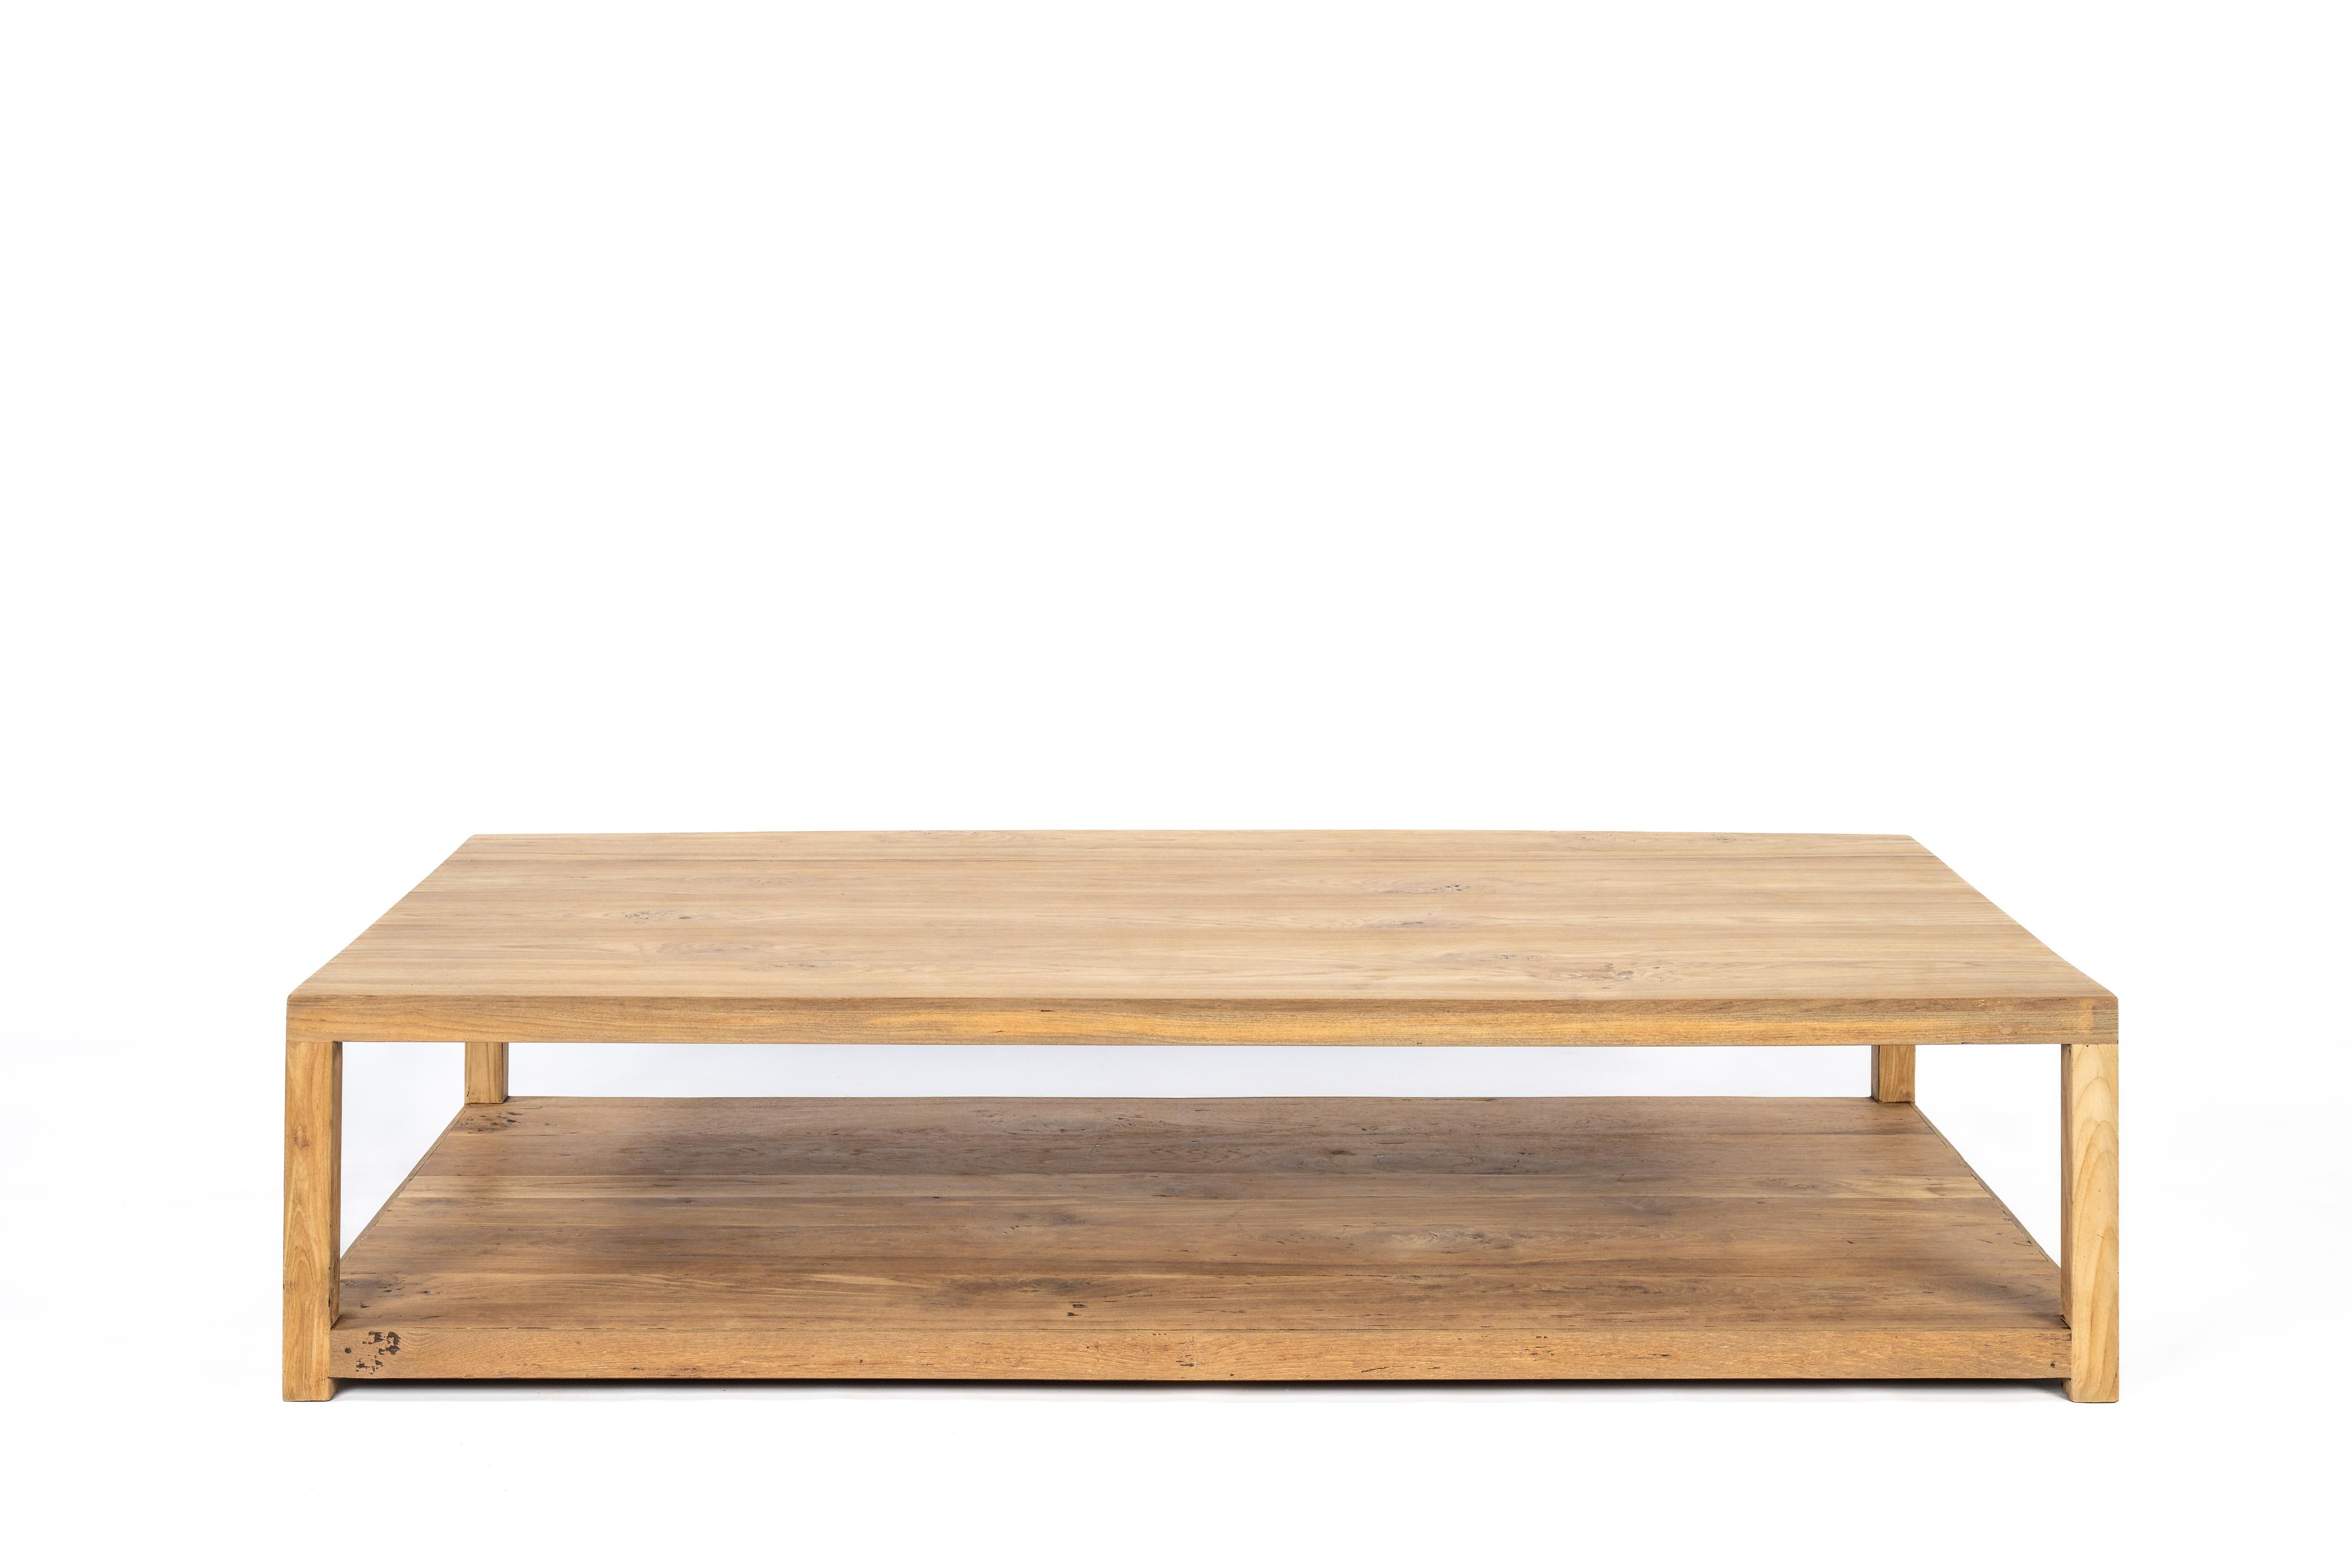 Here offered is a beautiful, sleek, modern-designed coffee table made from reclaimed teak wood. The coffee table was crafted from old teak wood sourced from old tables from Indonesia. The design of the coffee table is very sleek with a thickened